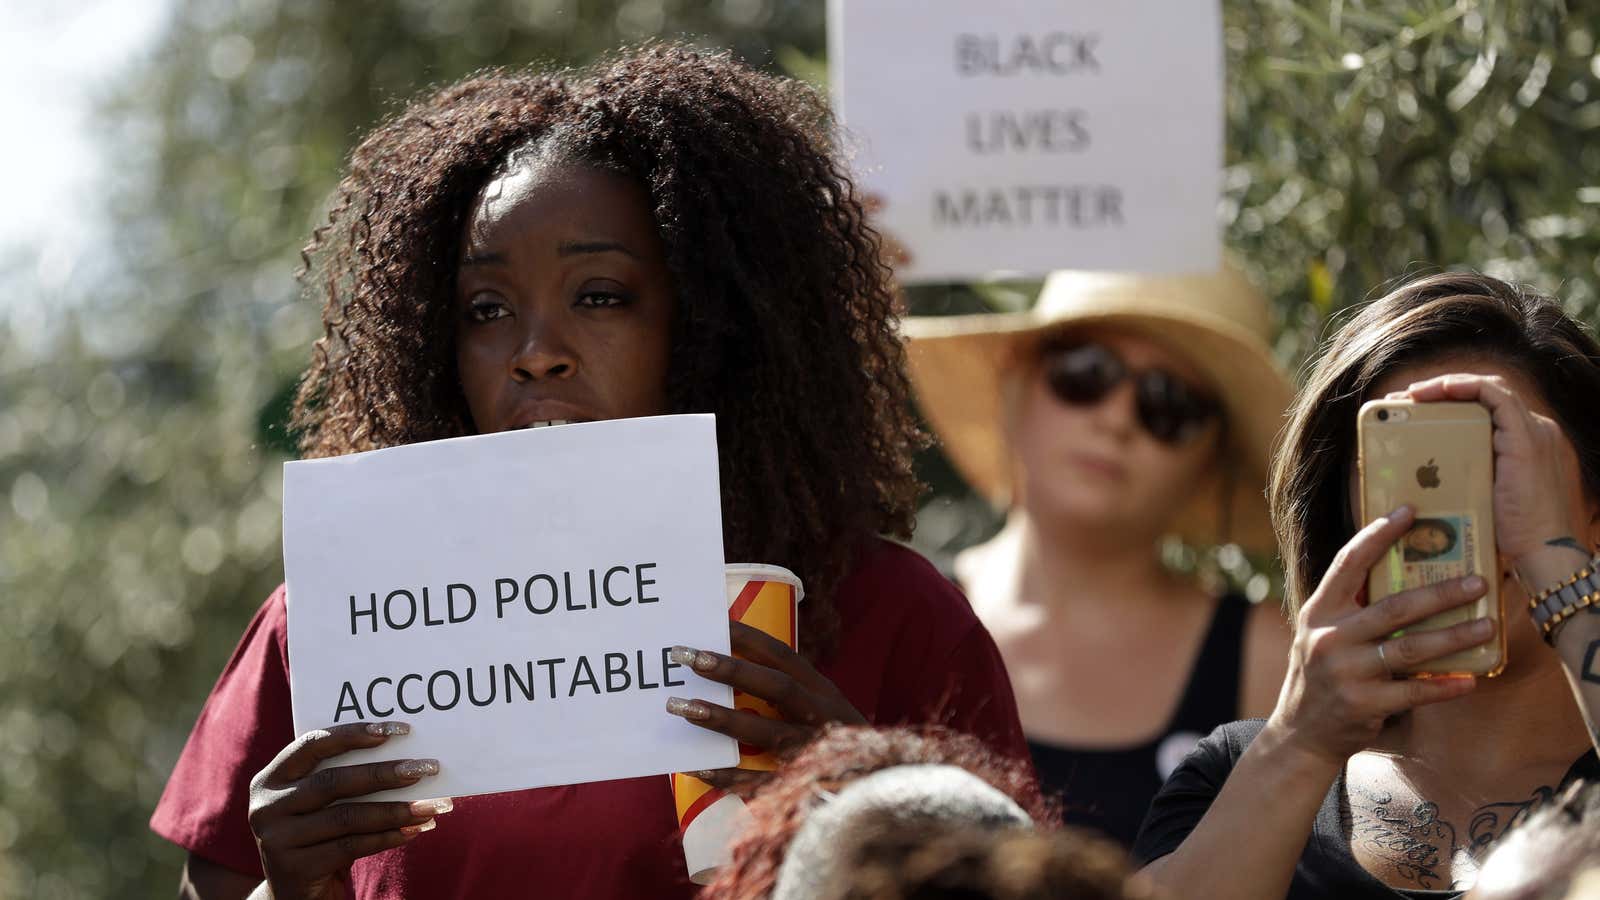 A protest in front of the El Cajon police department.